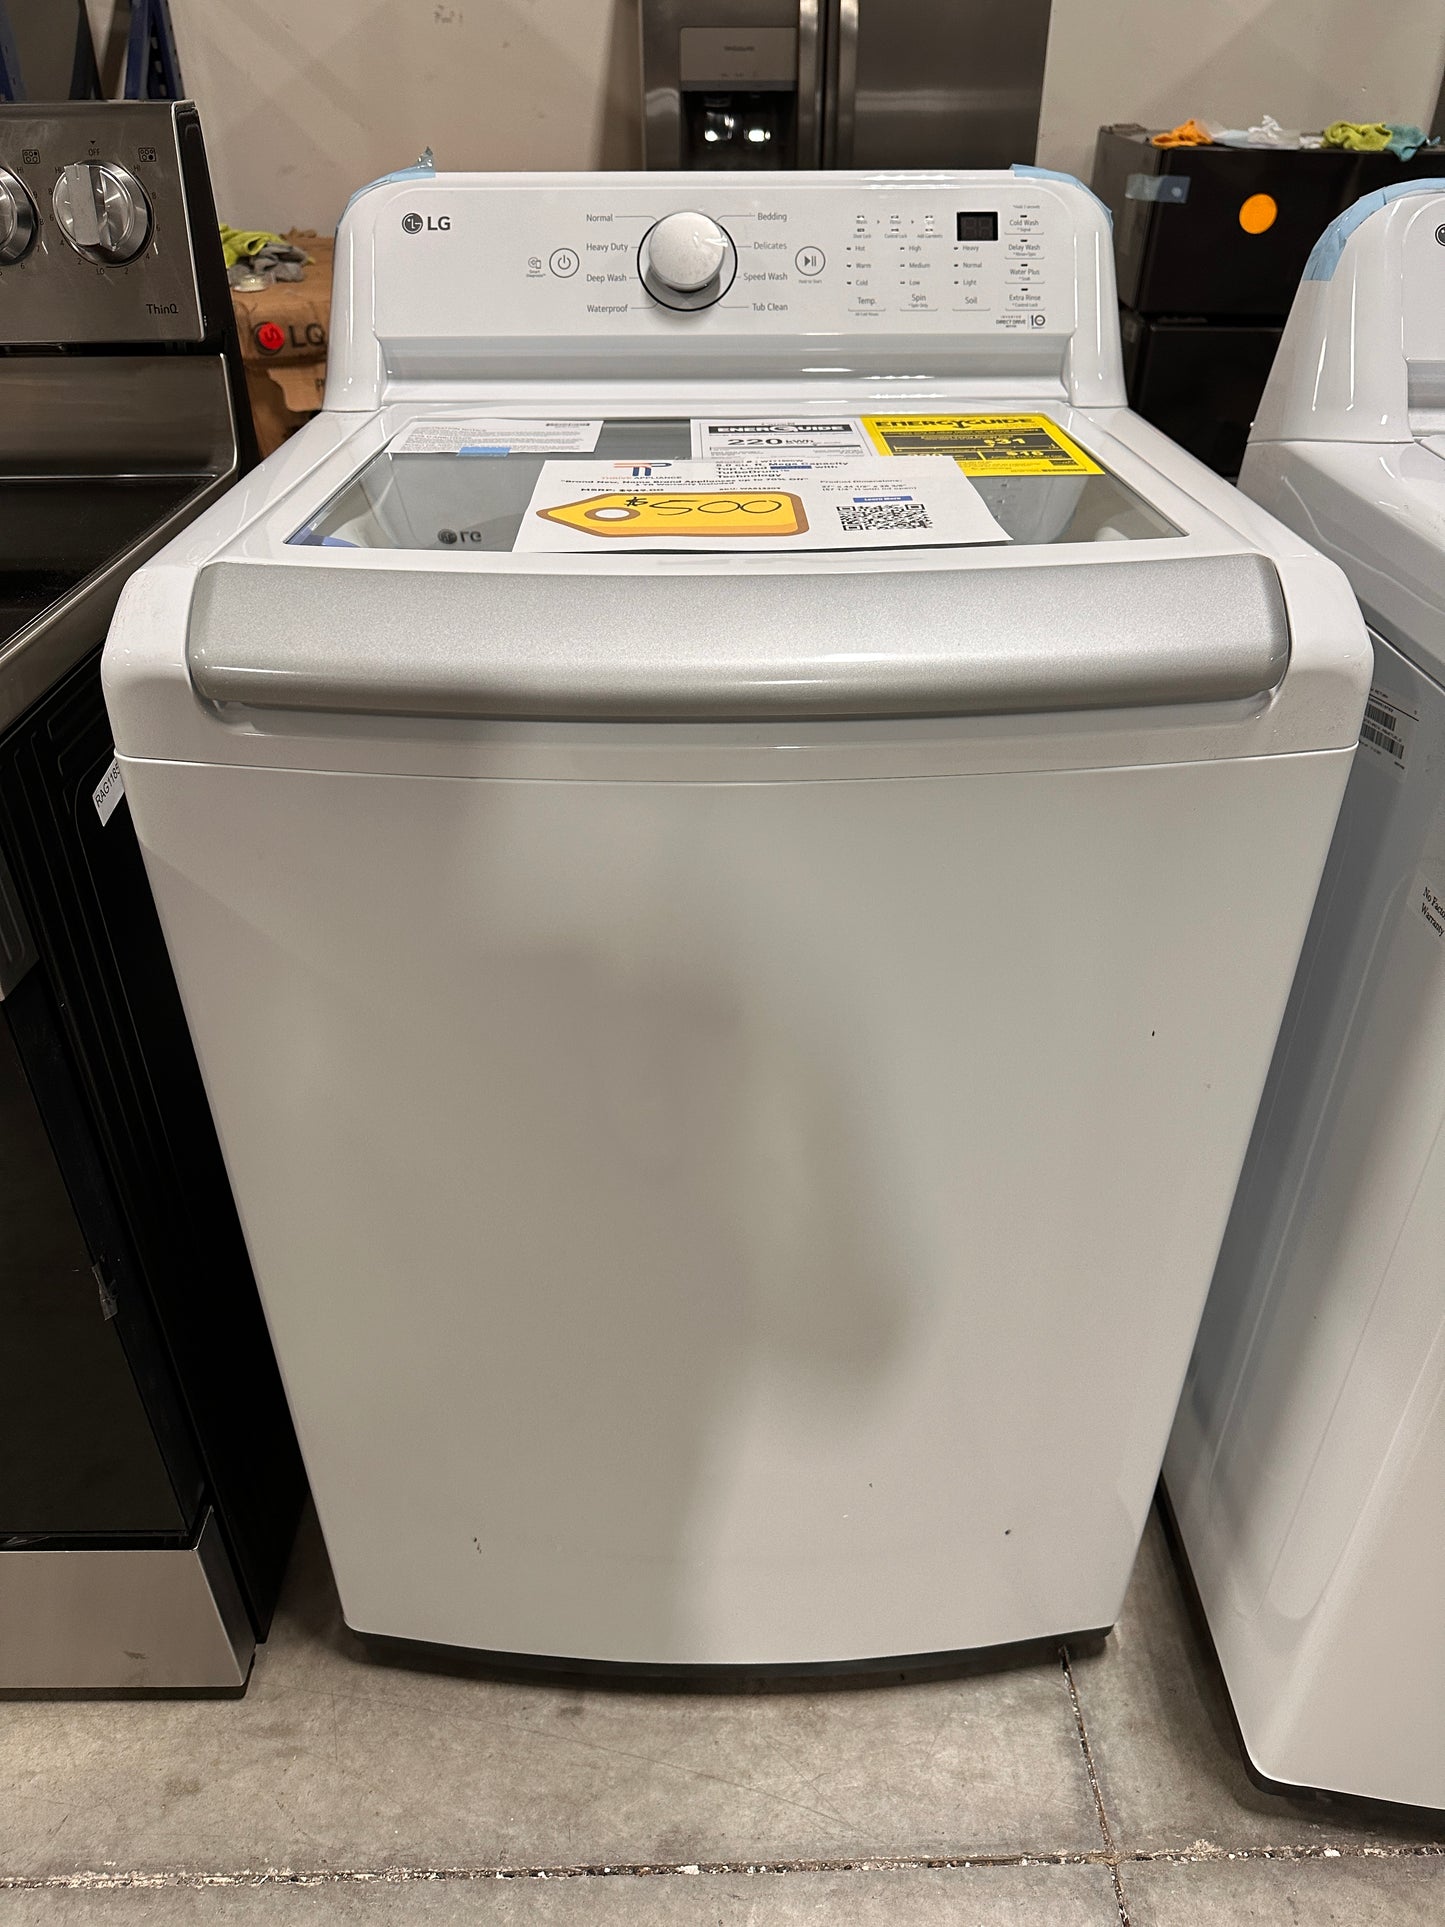 TOP LOAD WASHER WITH 6MOTION TECHNOLOGY - NEW LG WASHER - MODEL: WT7150CW  WAS13209